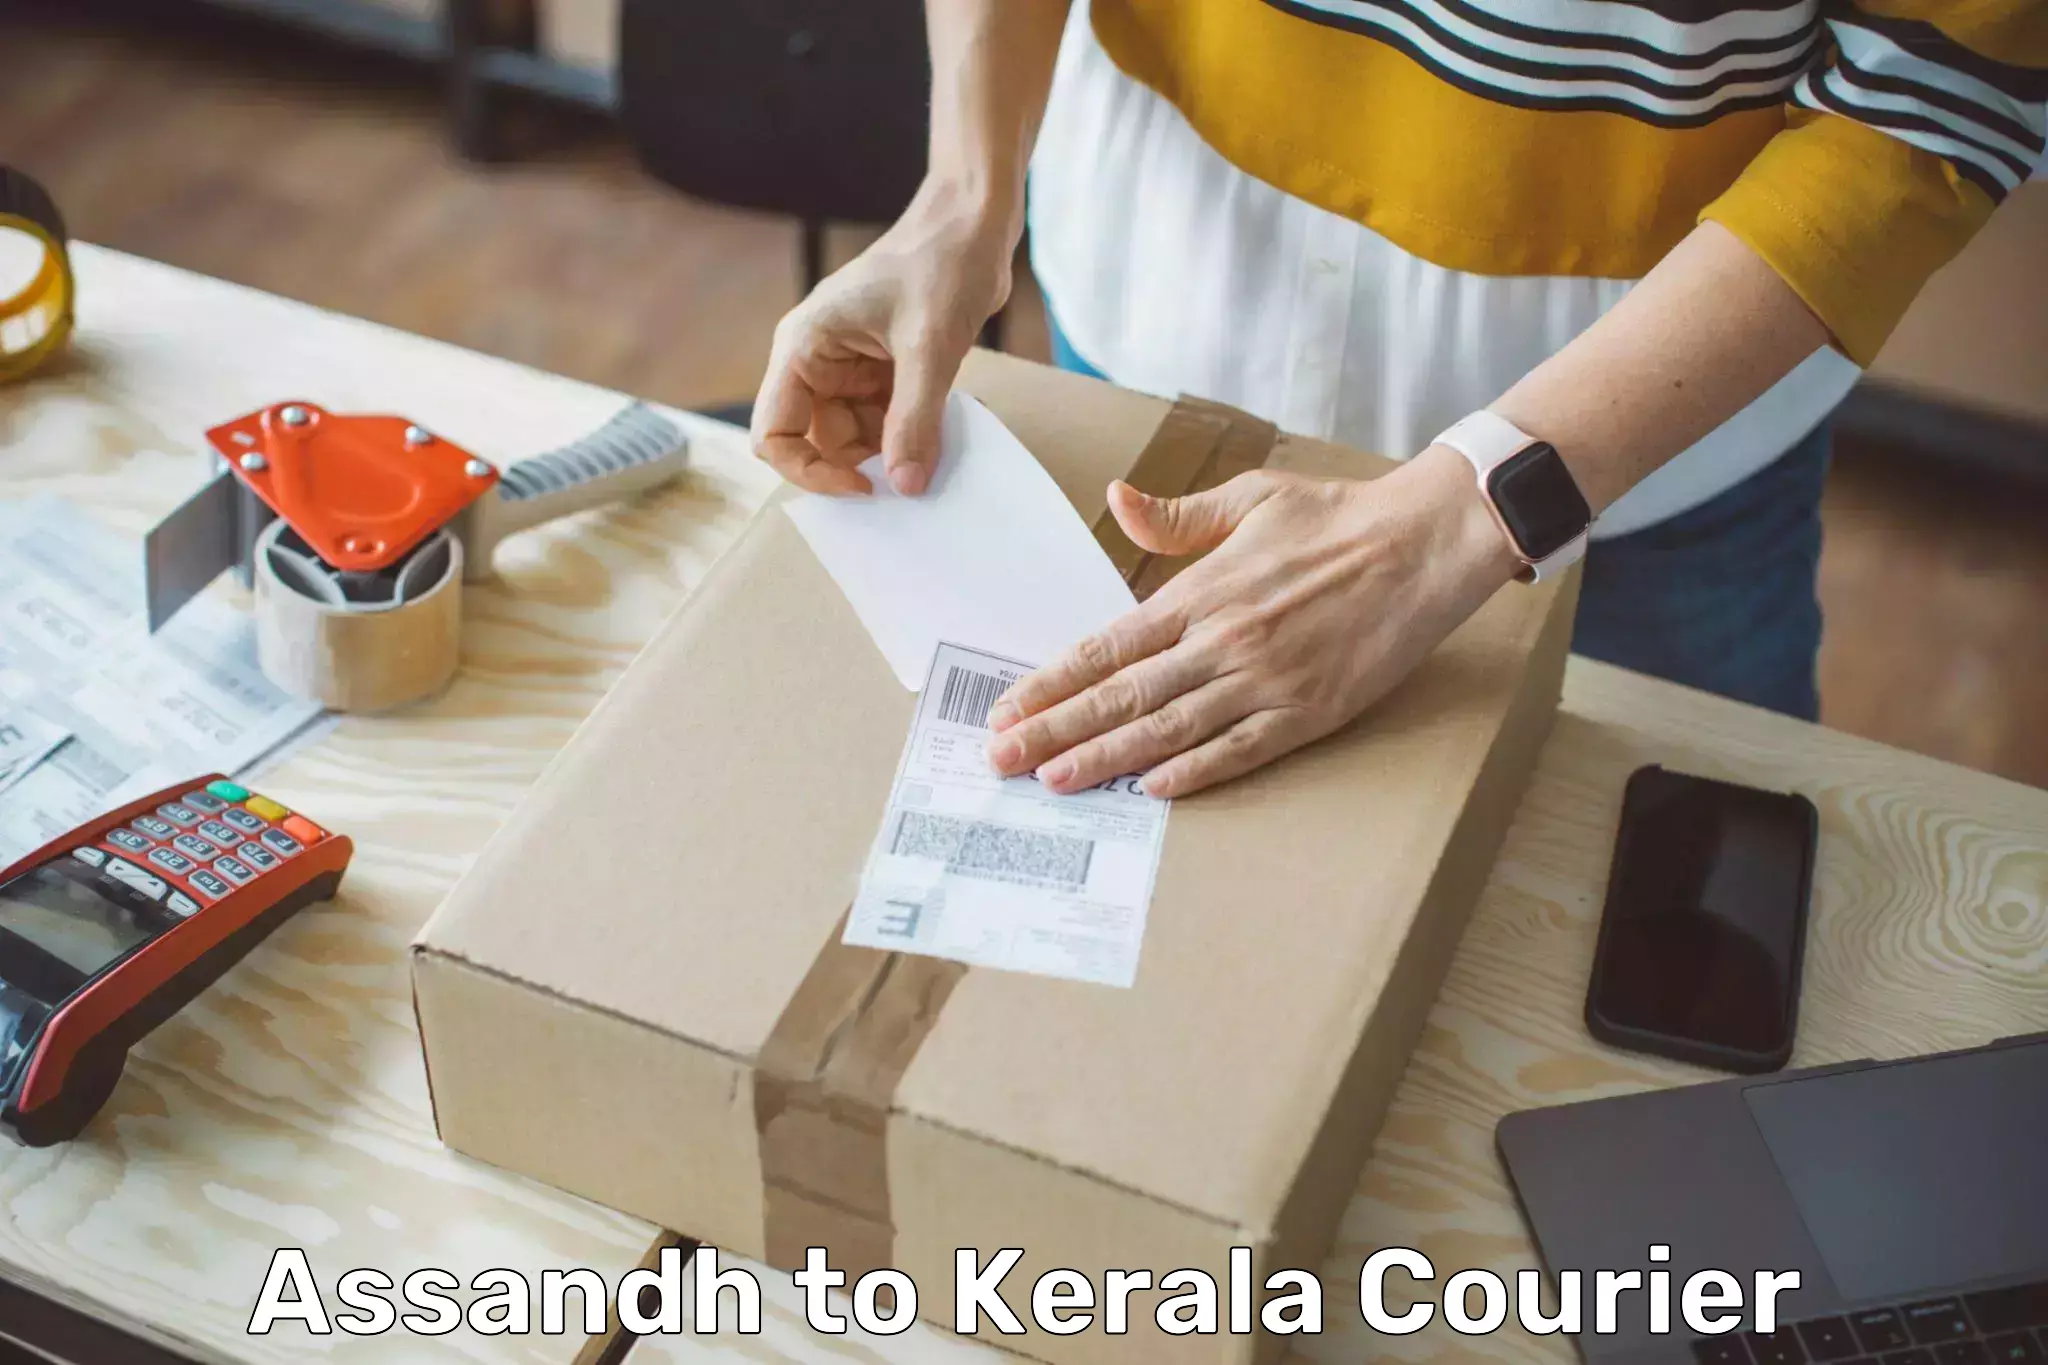 Professional courier handling Assandh to Ernakulam